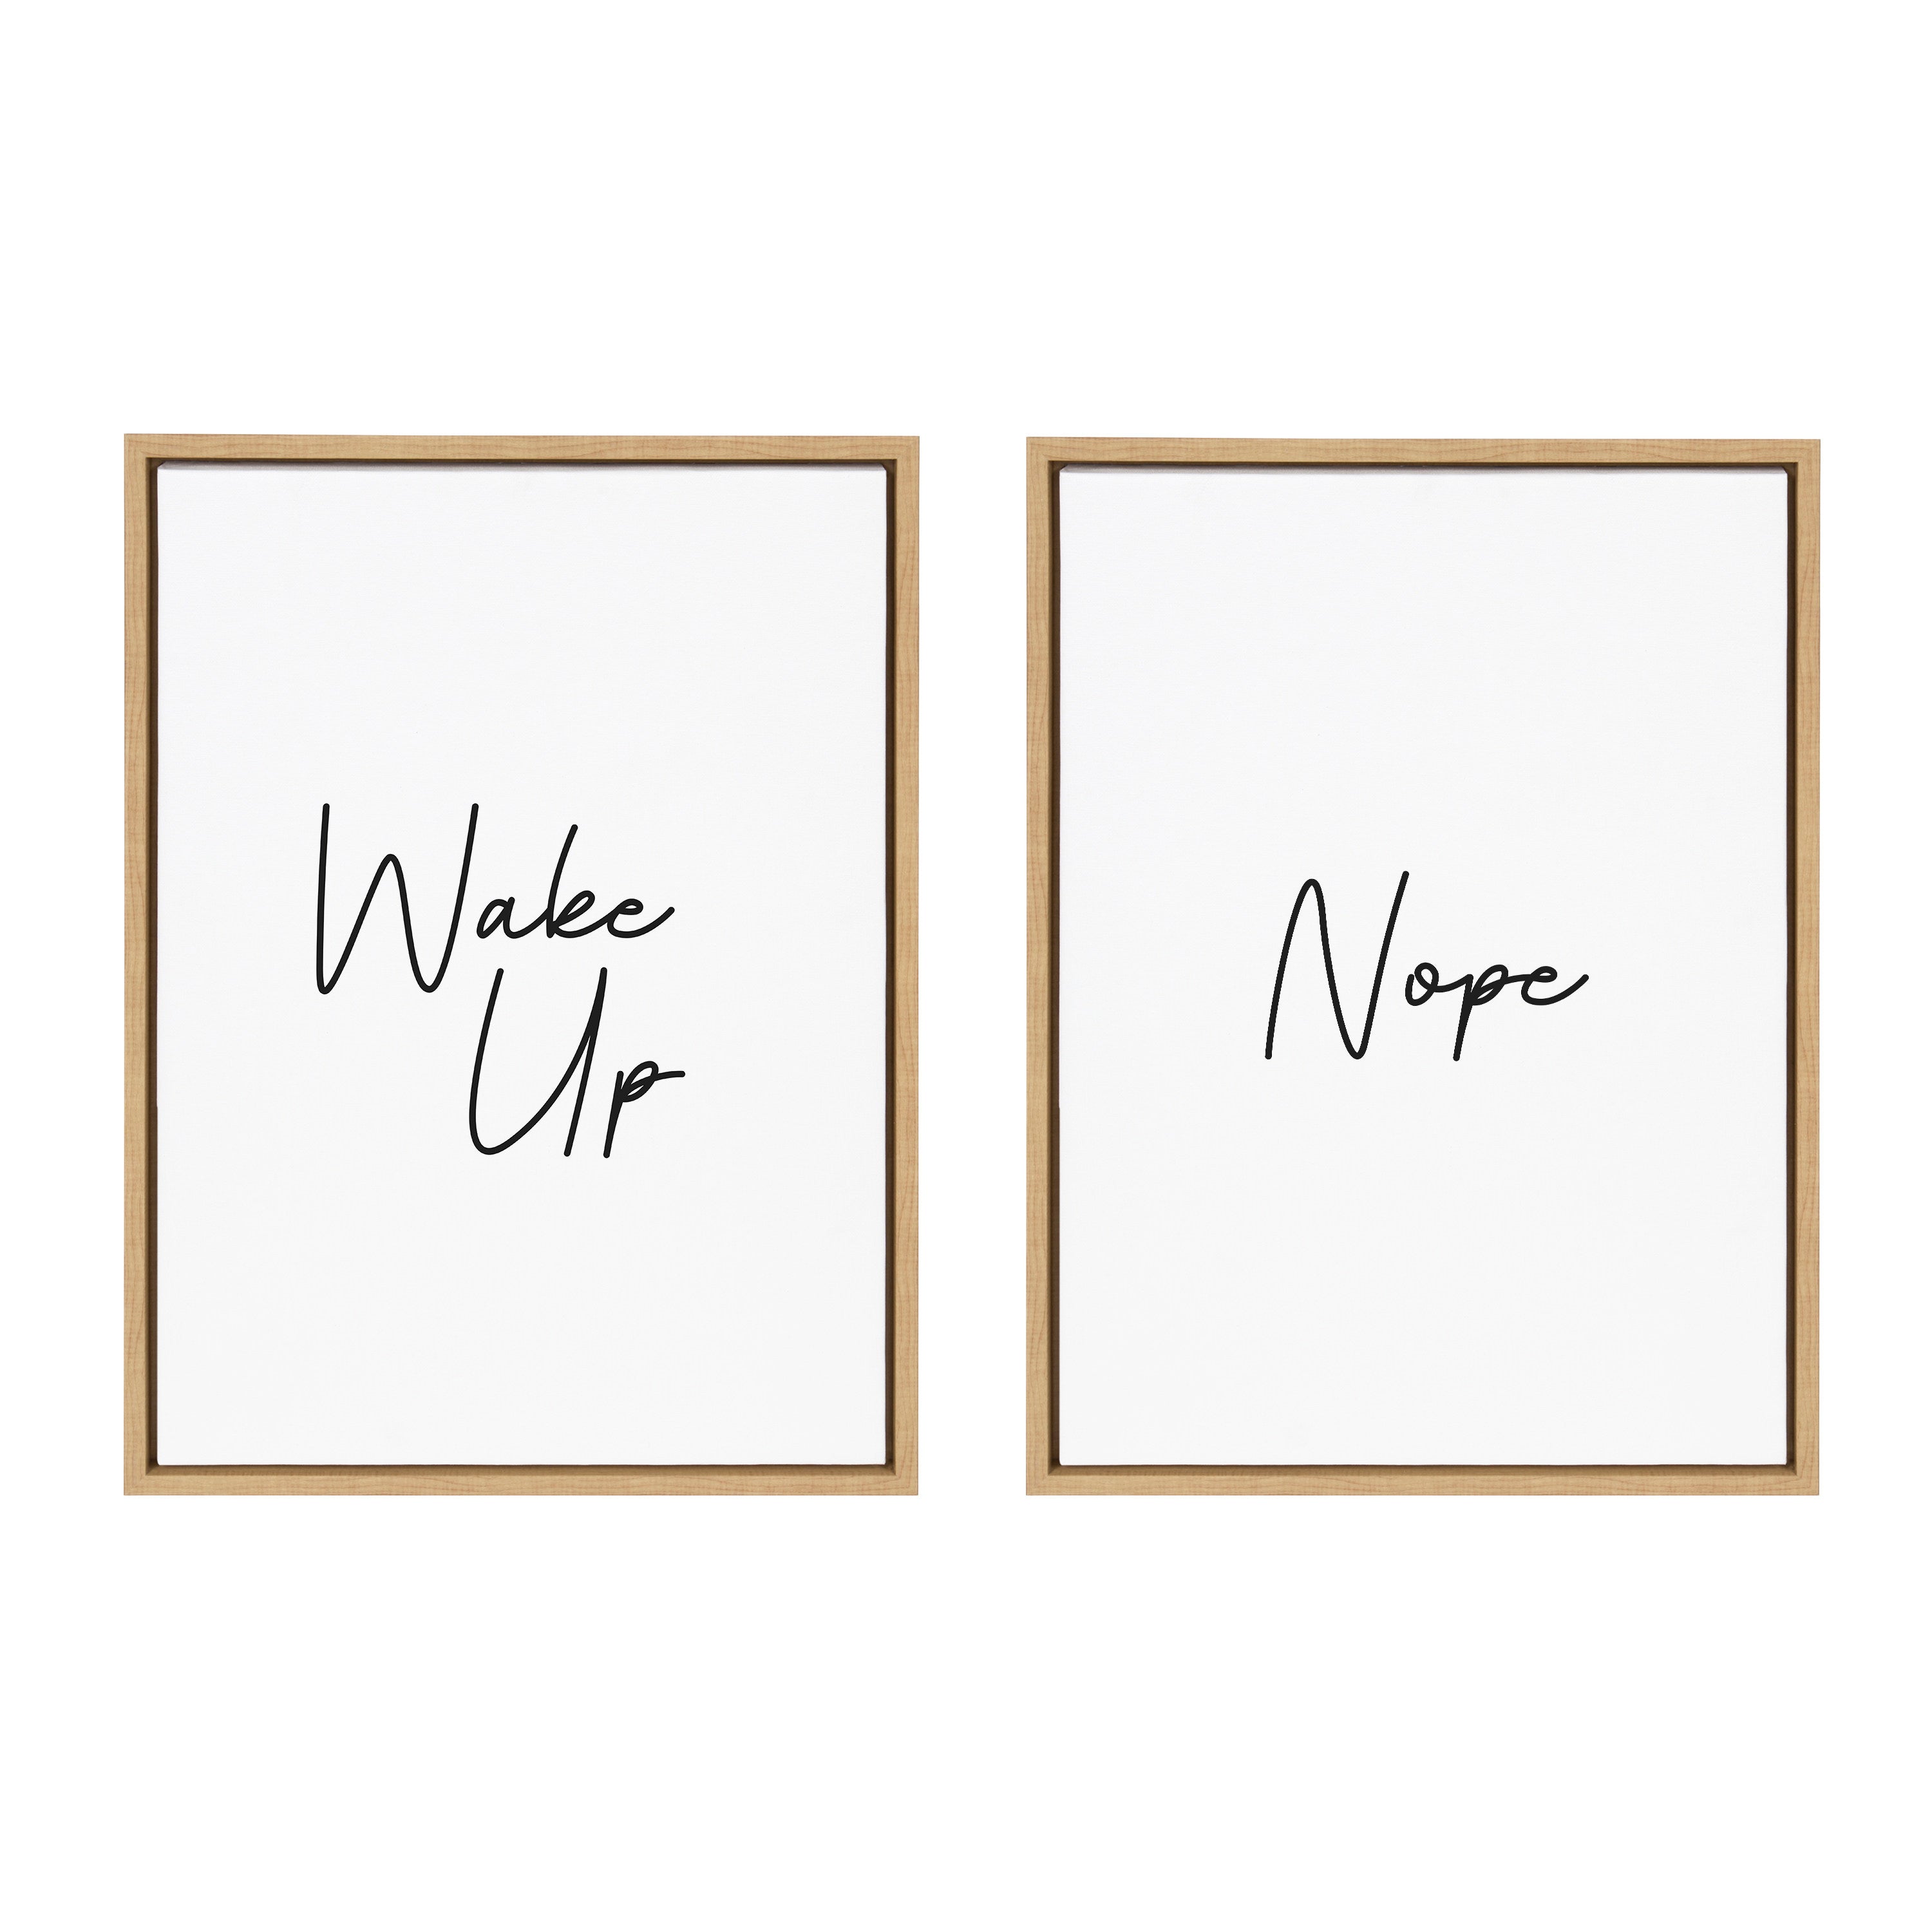 Sylvie Wake Up and Nope Framed Canvas Set by The Creative Bunch Studio